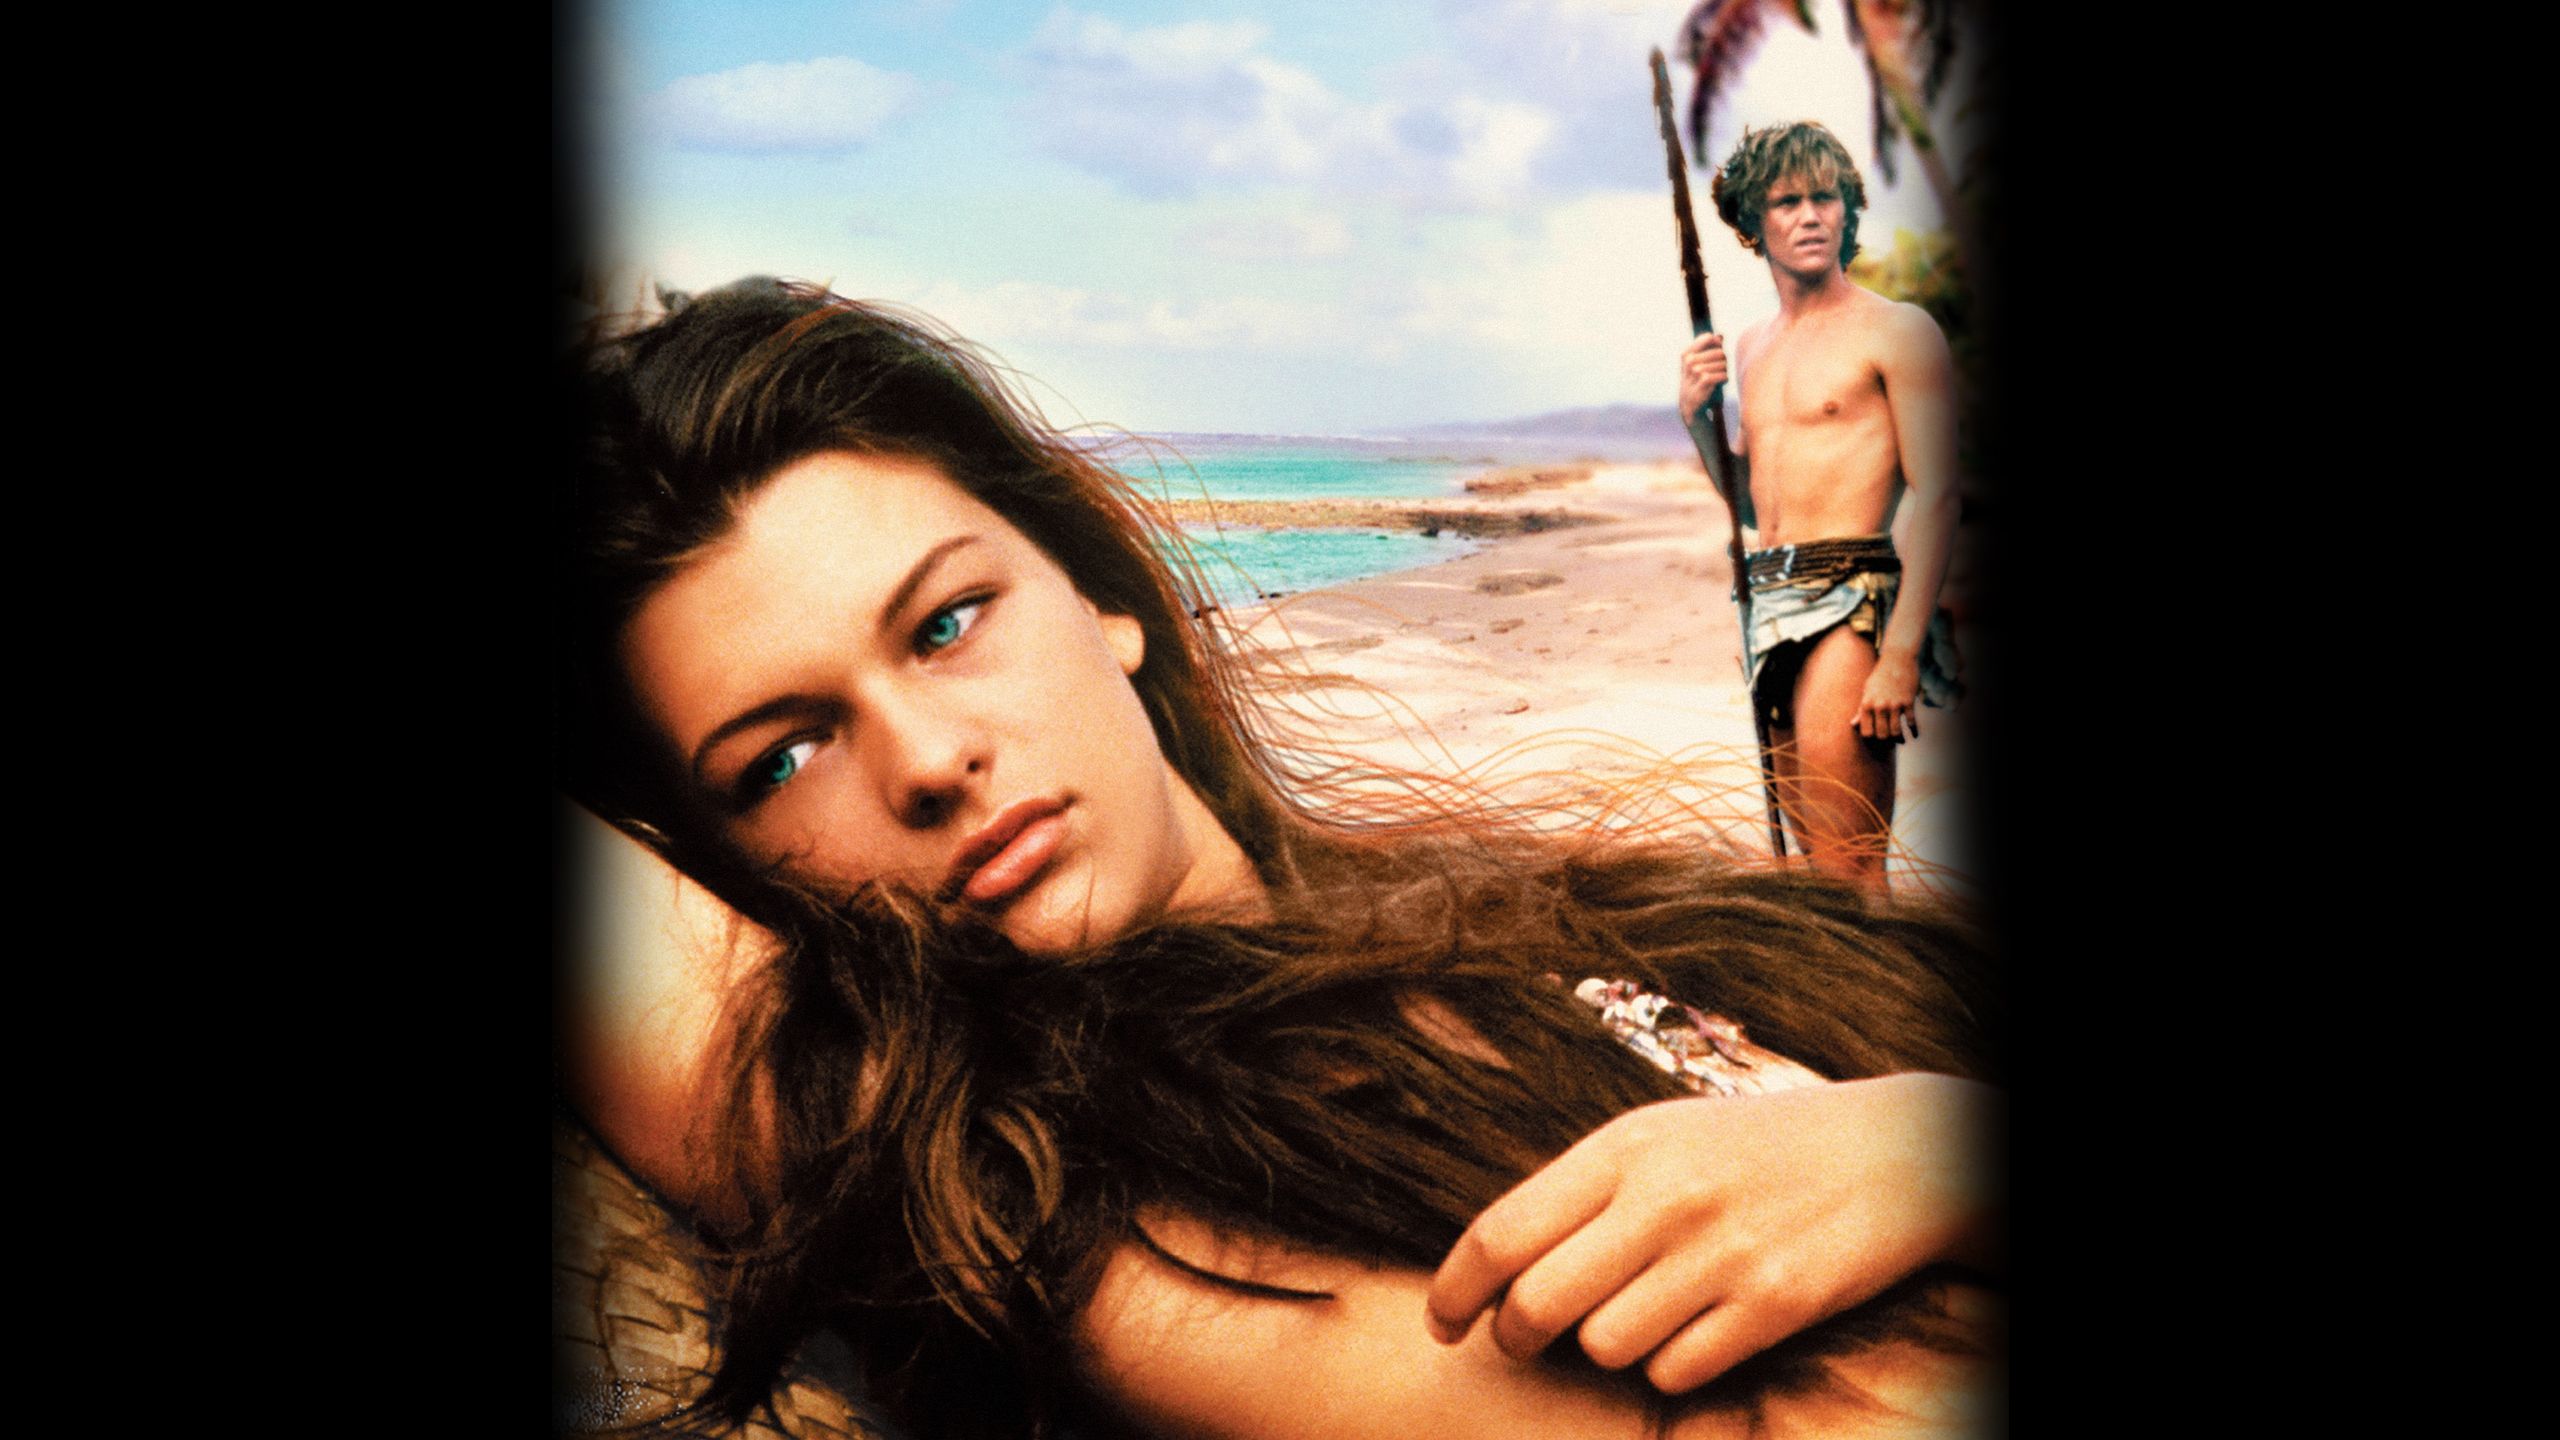 ally wray recommends the blue lagoon full movie download pic